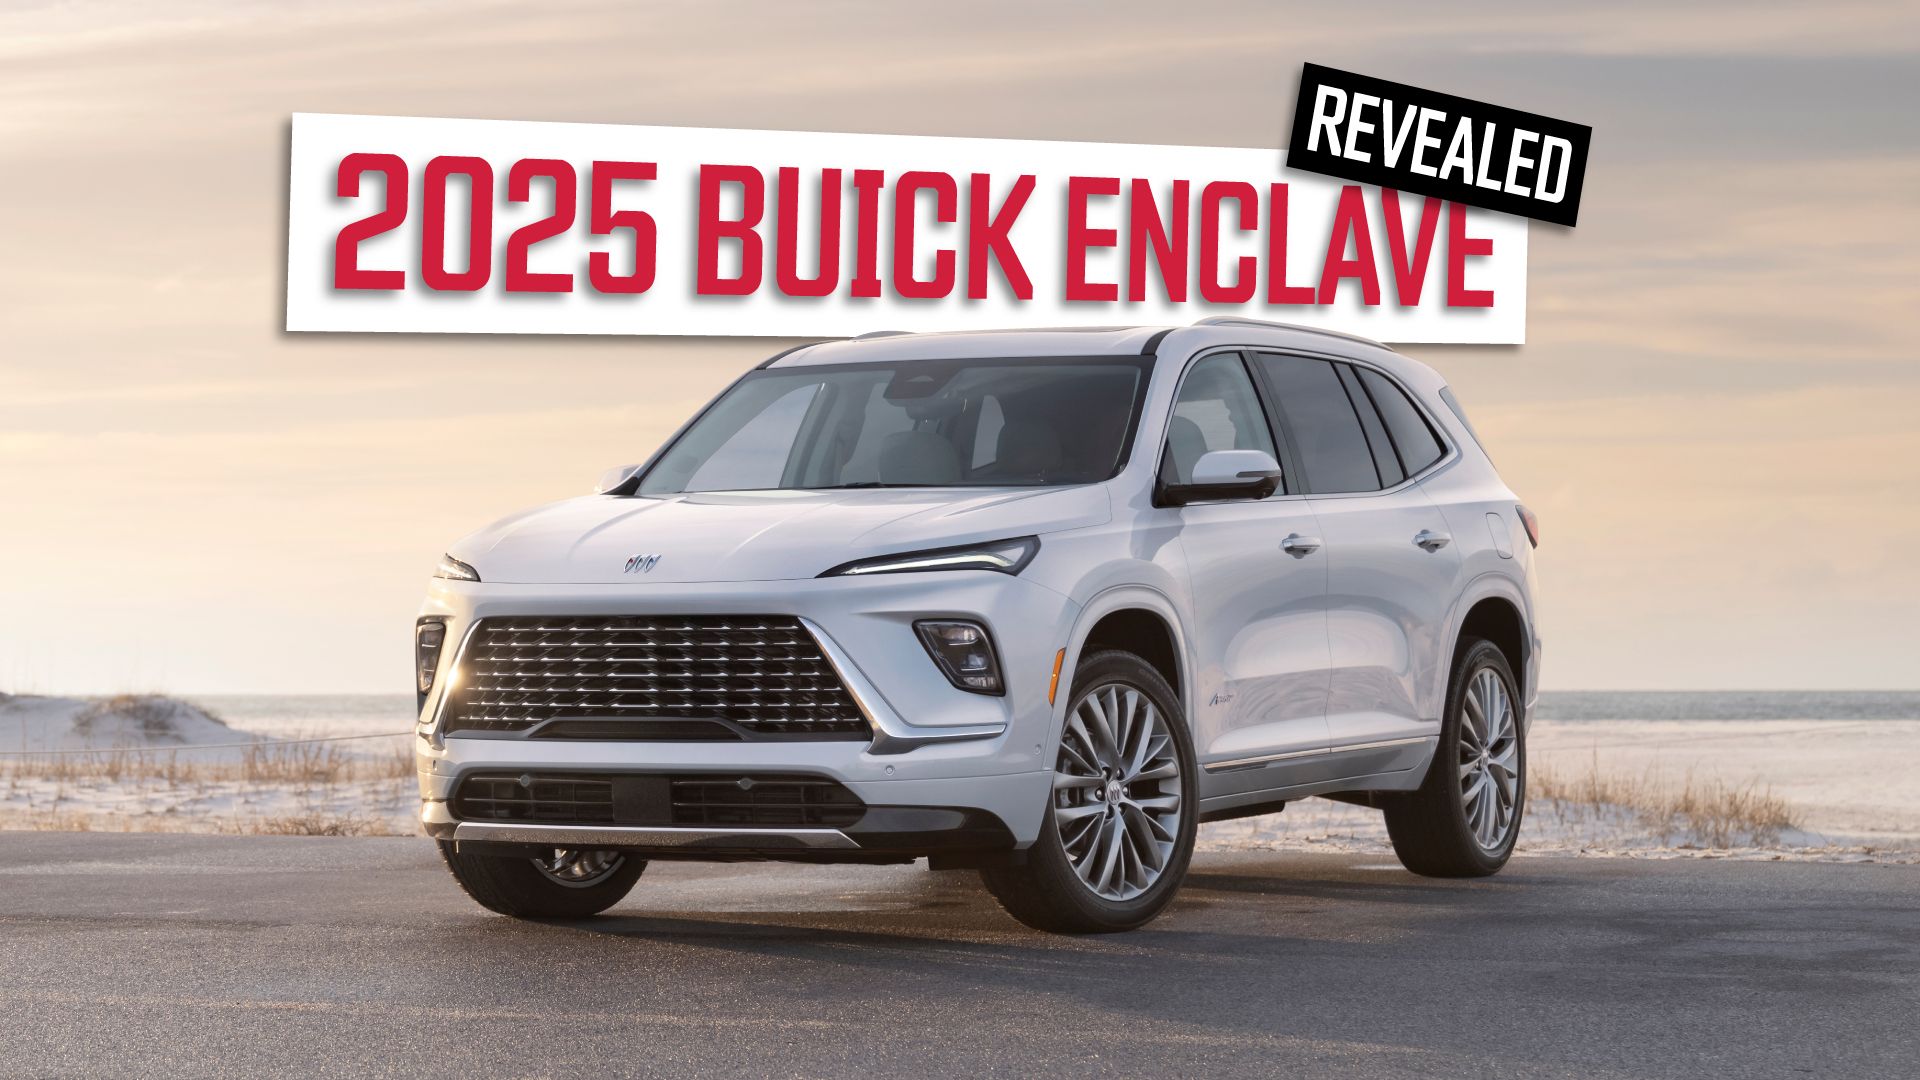 2025-Buick-Enclave-Revealed